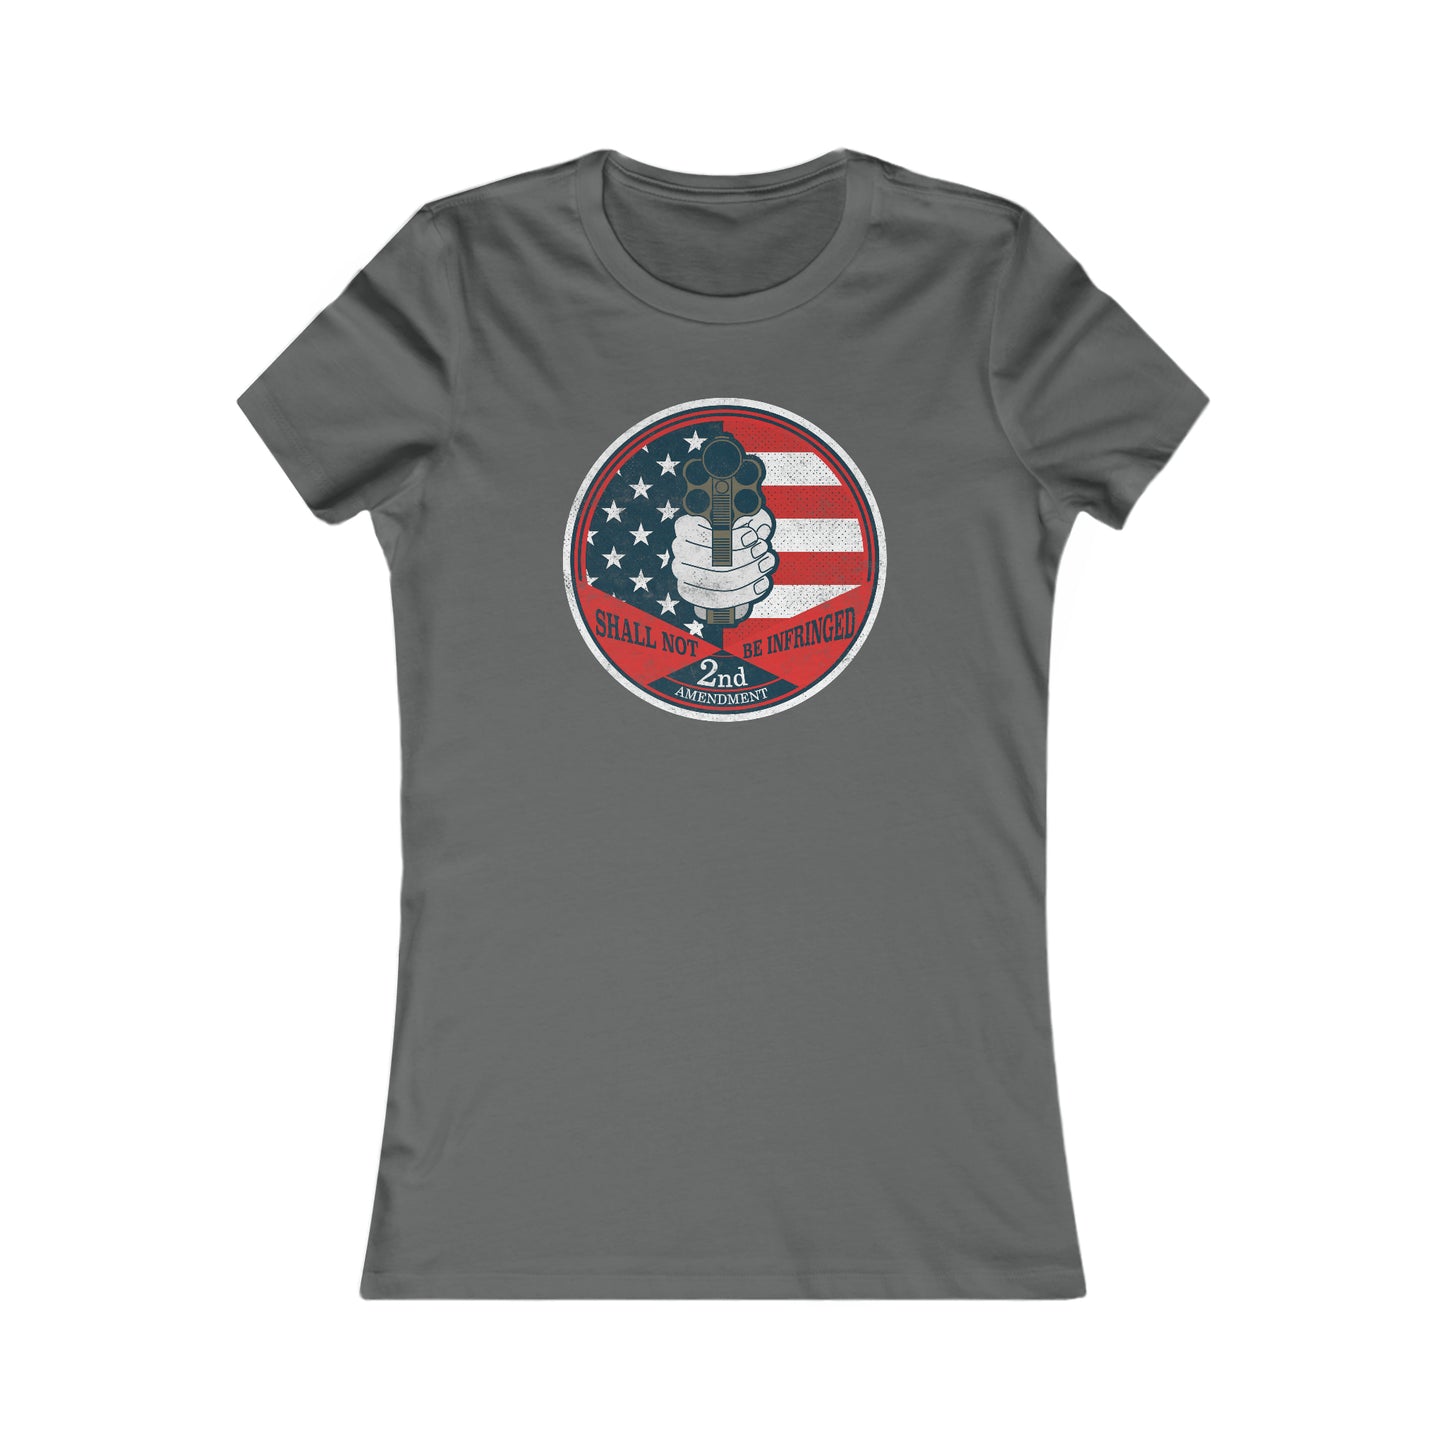 Shall Not Be Infringed 2A Women's Favorite Tee